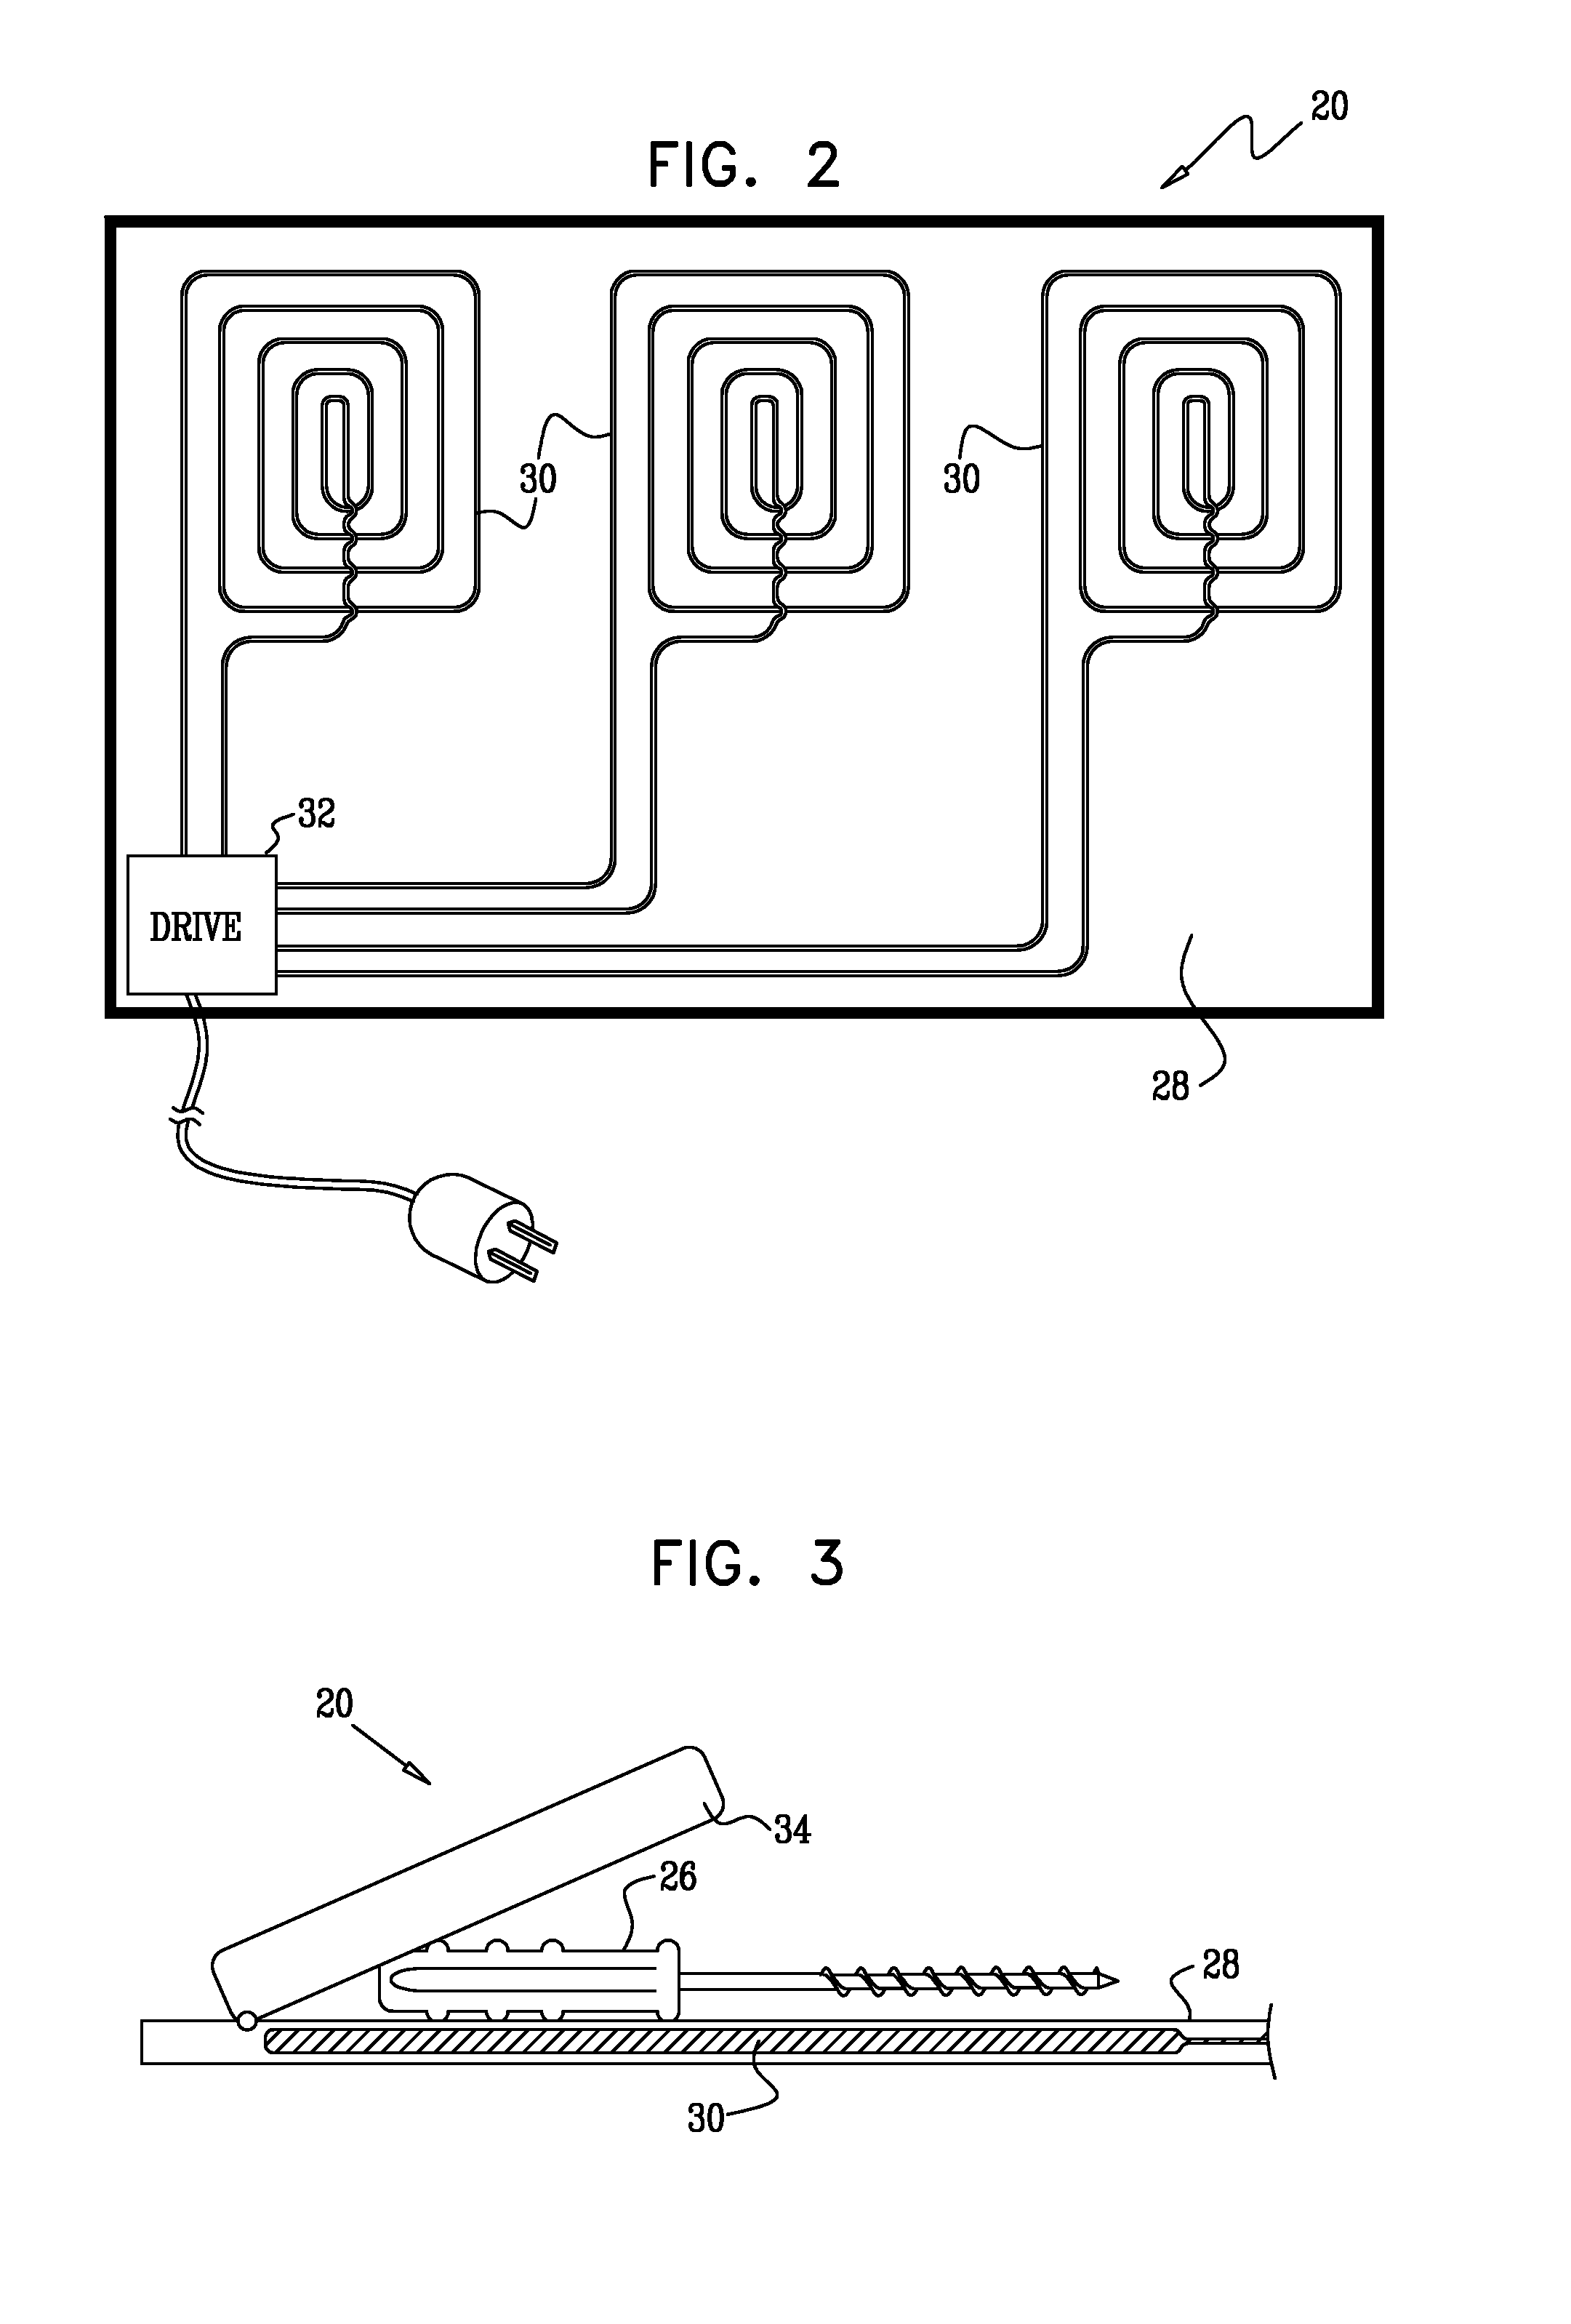 Inductive charging of tools on surgical tray